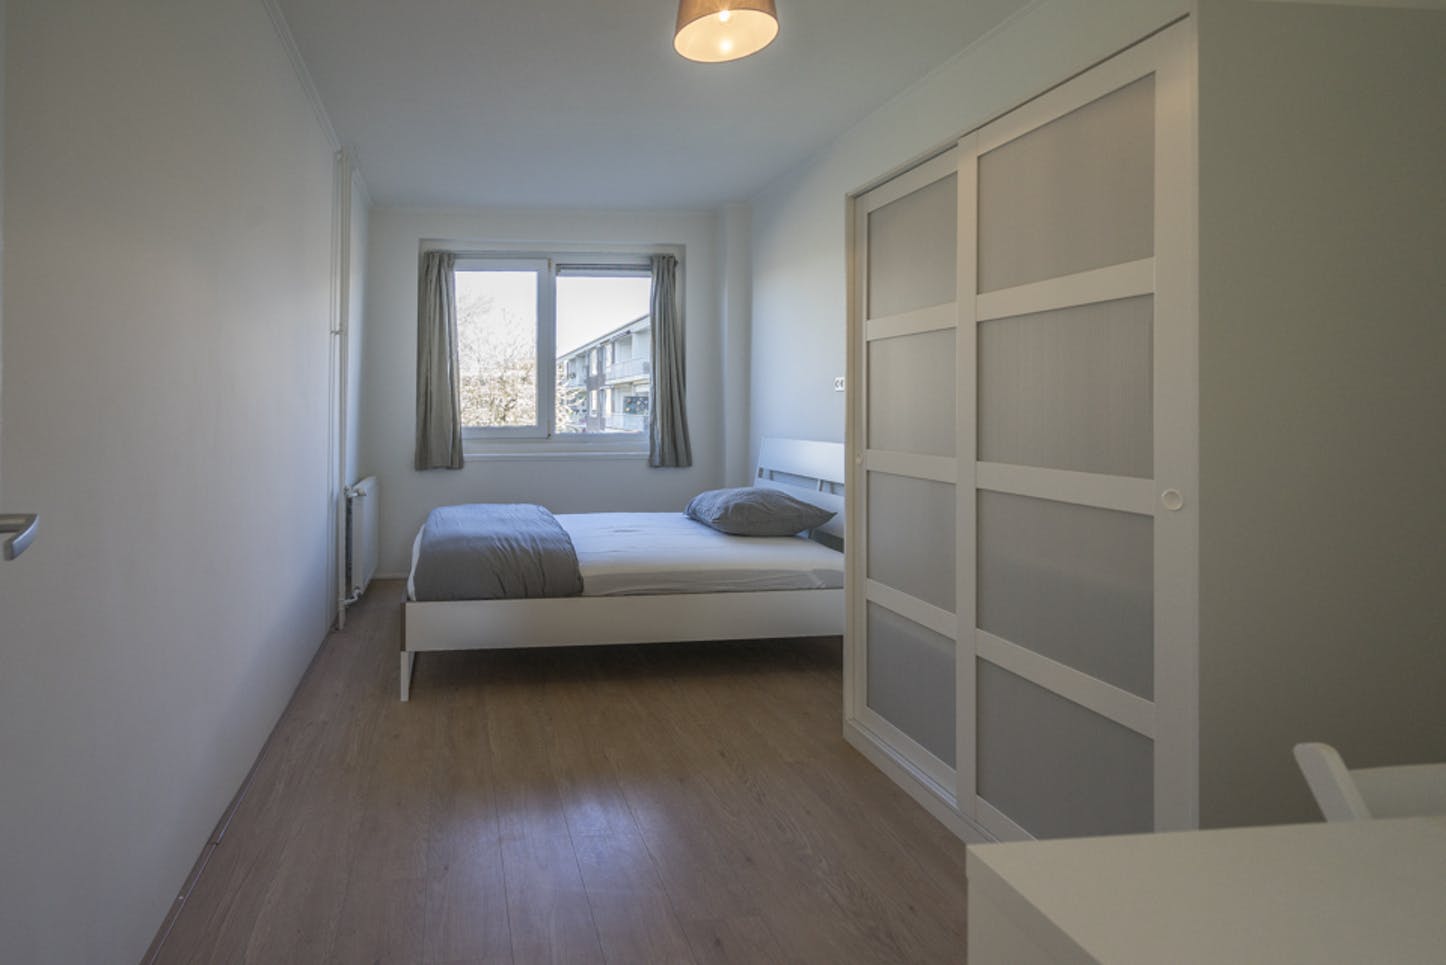 Botter - Private bedroom in Amsterdam for expats